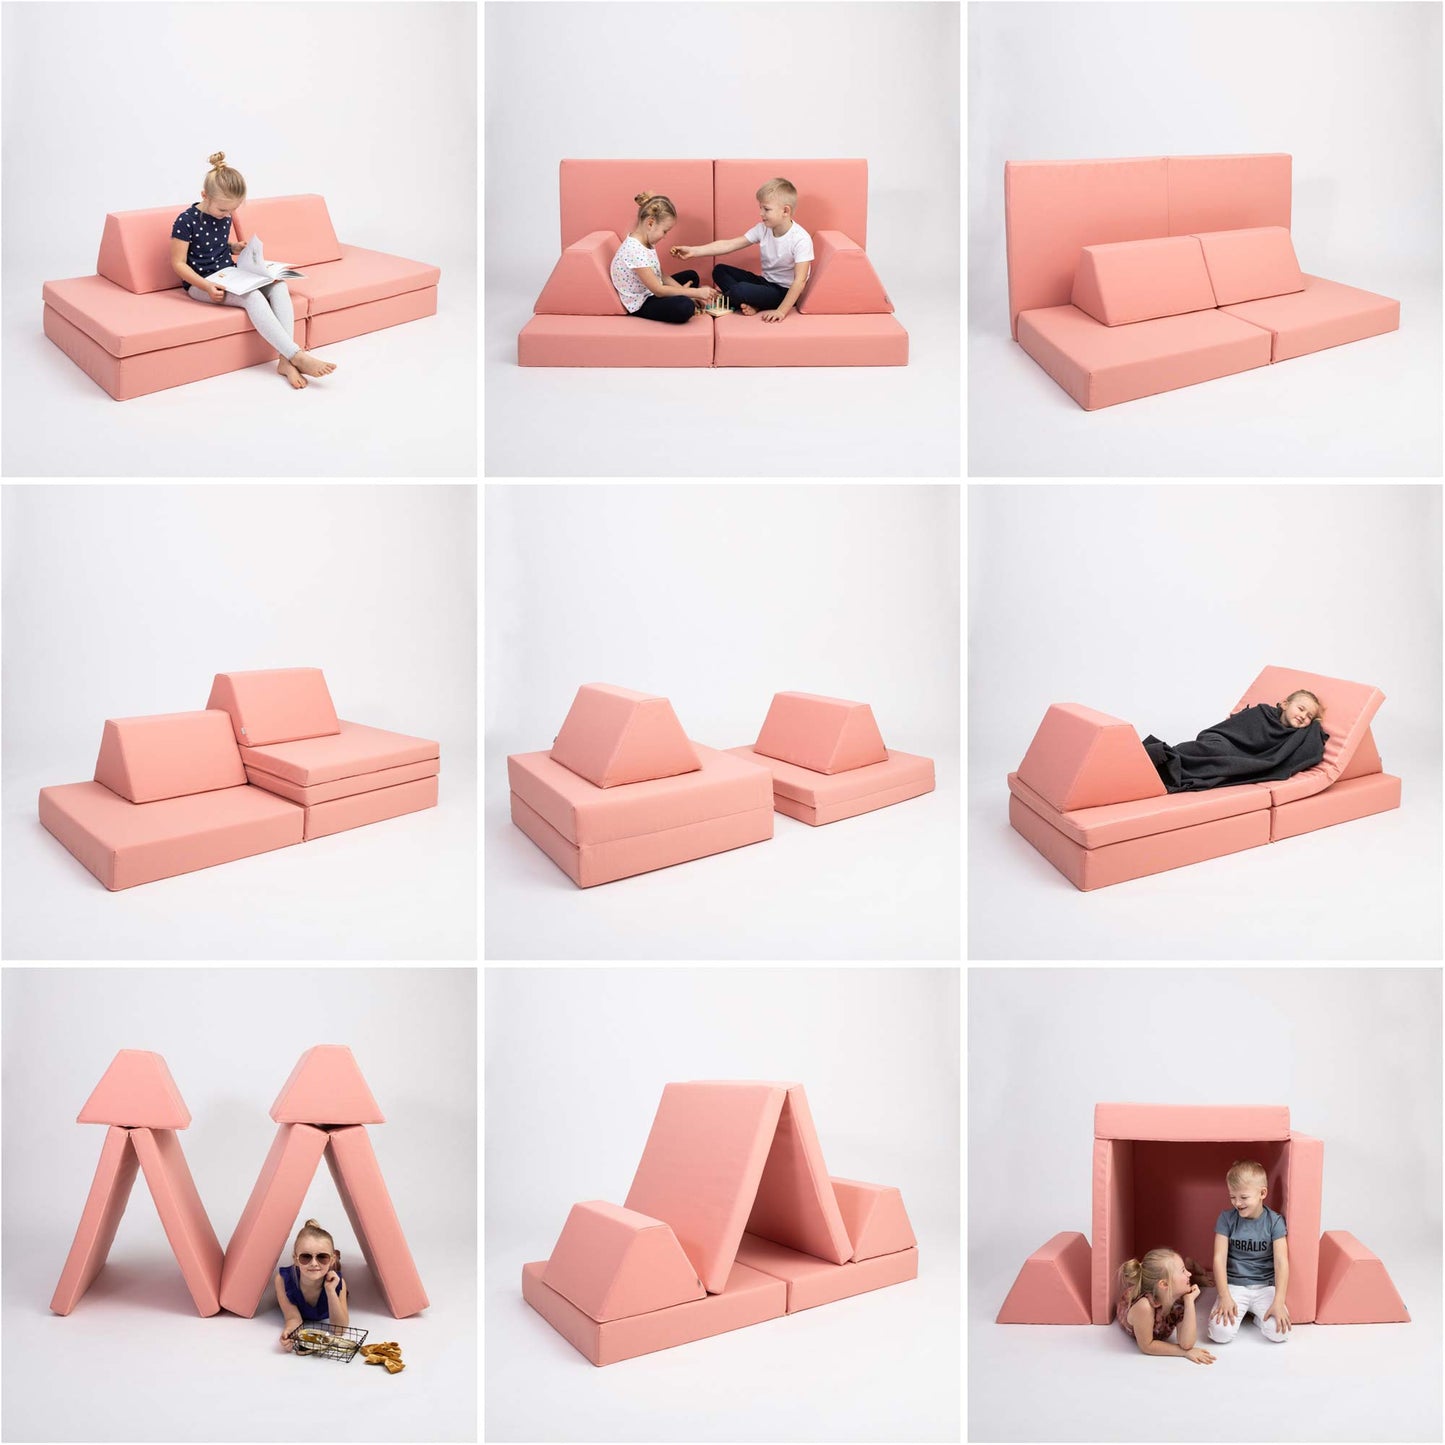 9 build ideas for Monboxy play sofa in salmon pink